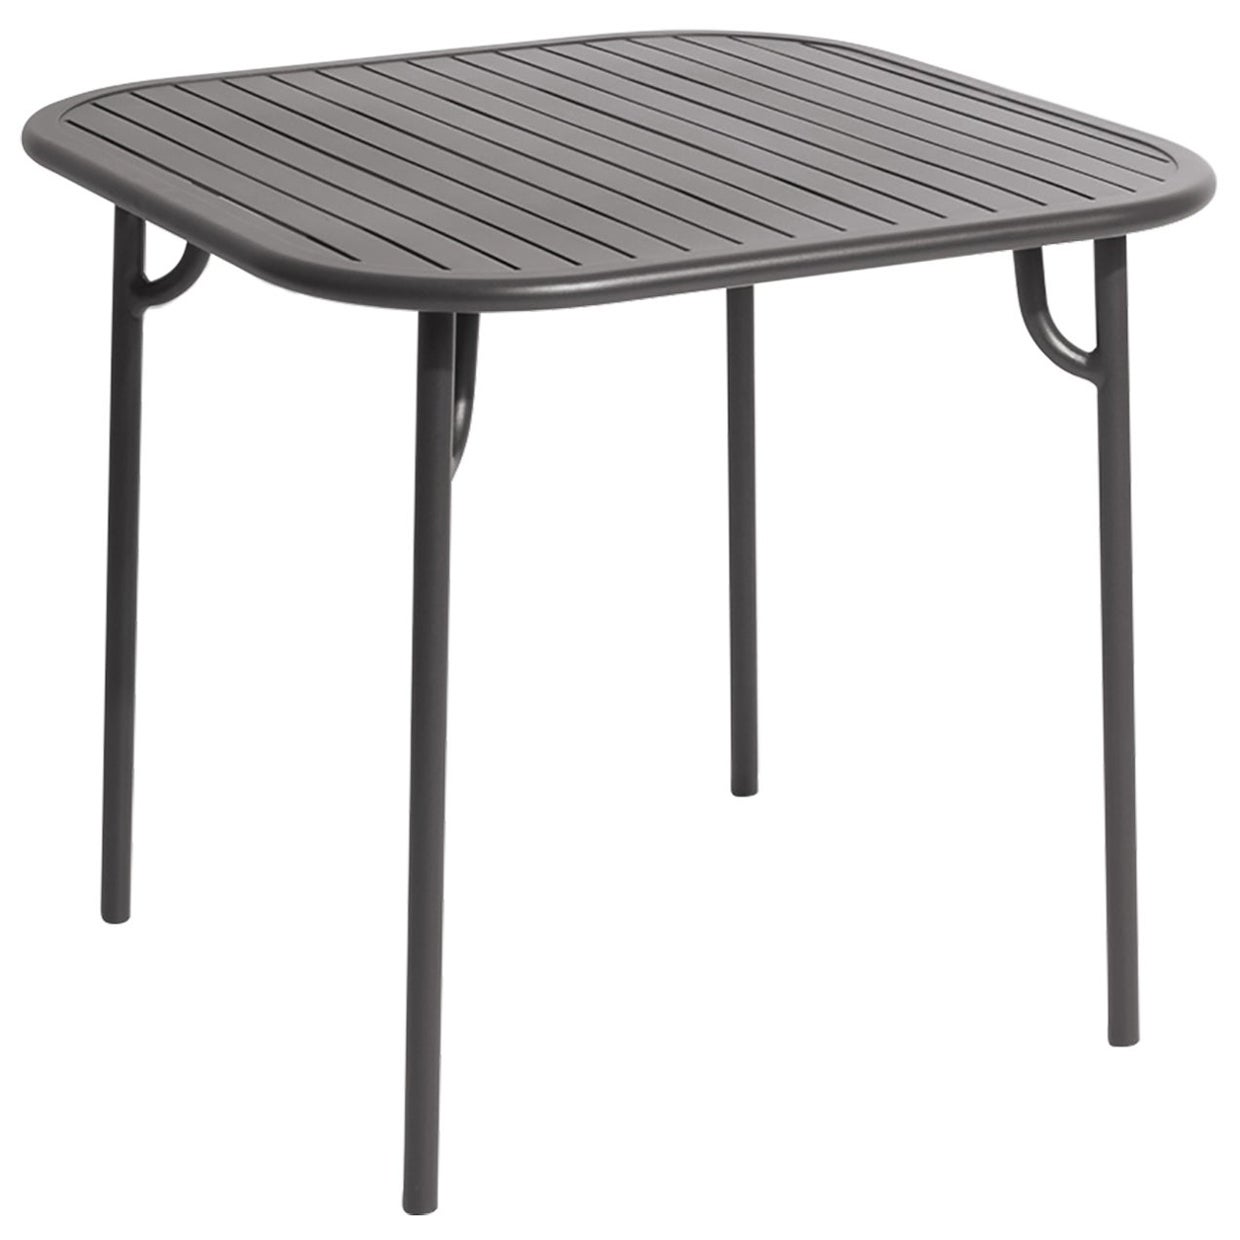 Petite Friture Week-End Square Dining Table in Anthracite Aluminium with Slats For Sale